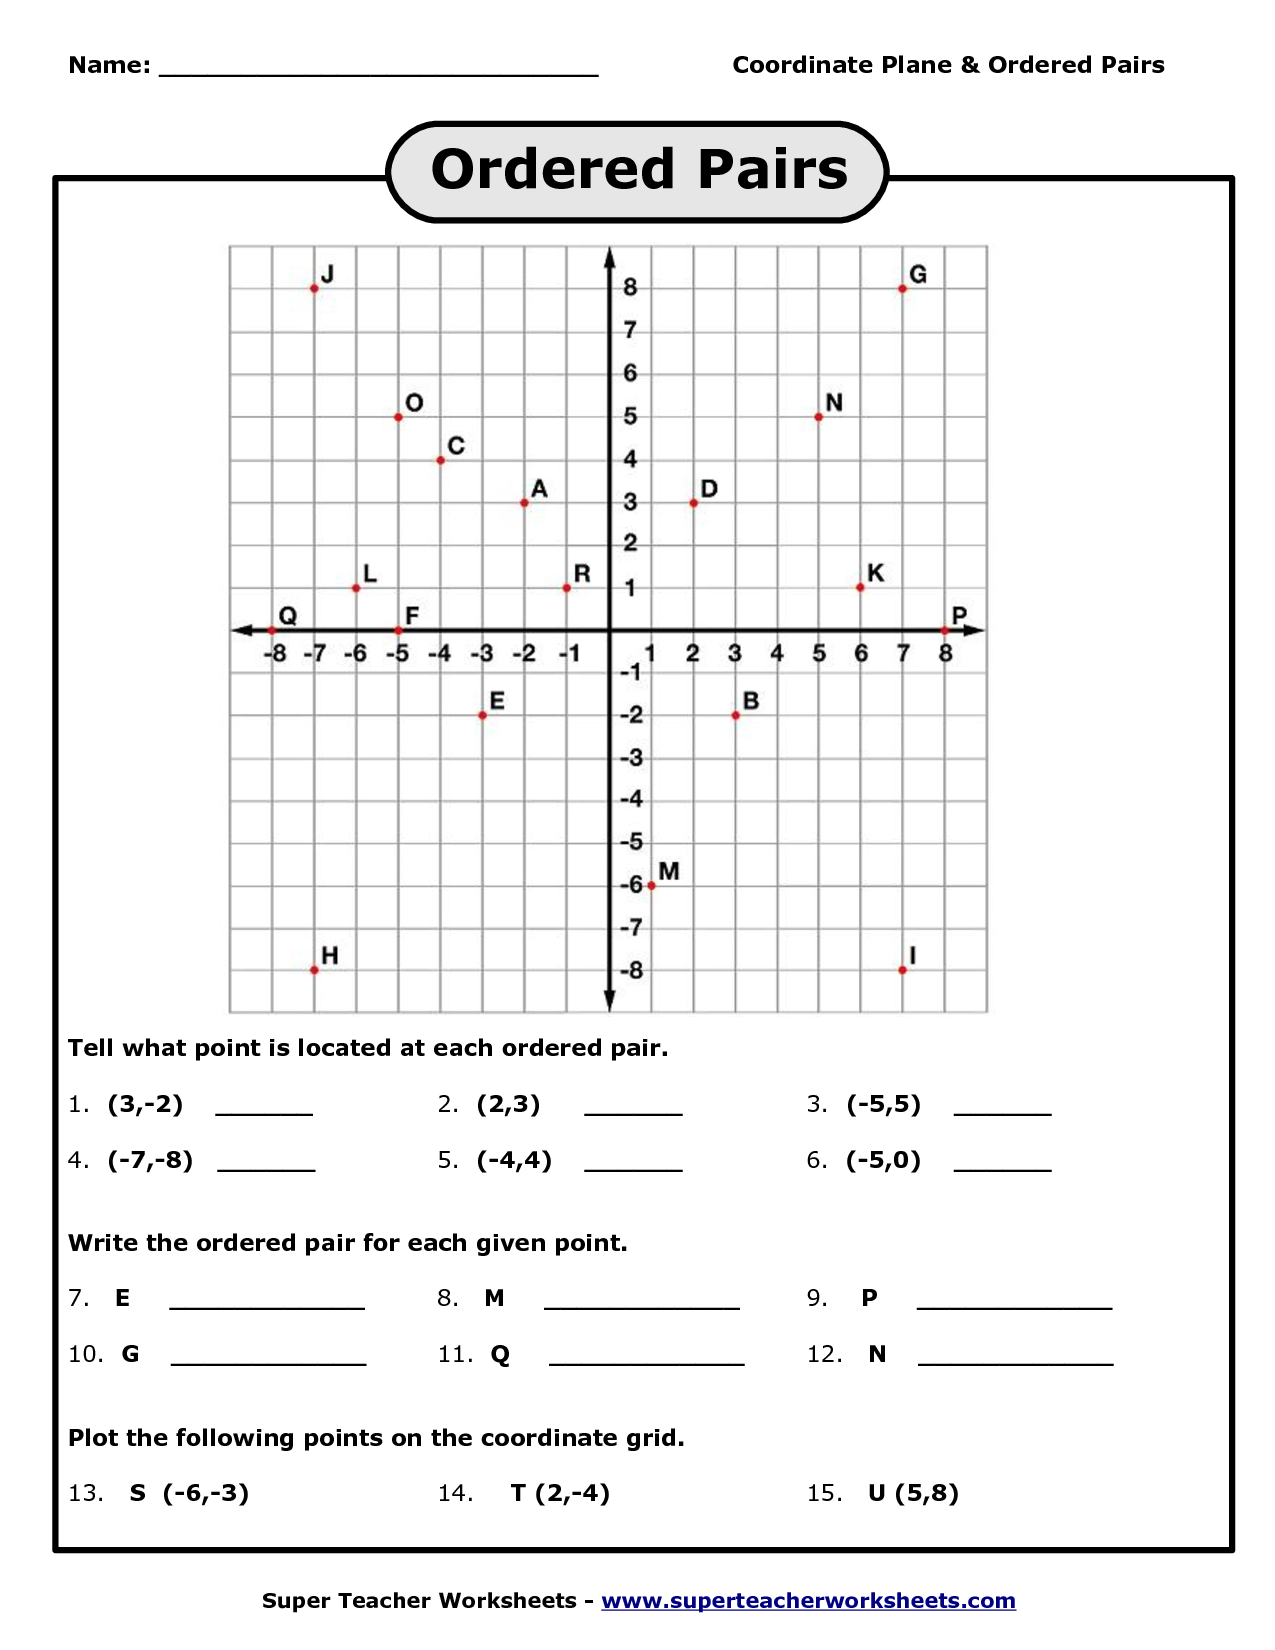 Planning A City On A Coordinate Grid Worksheet Answer Key